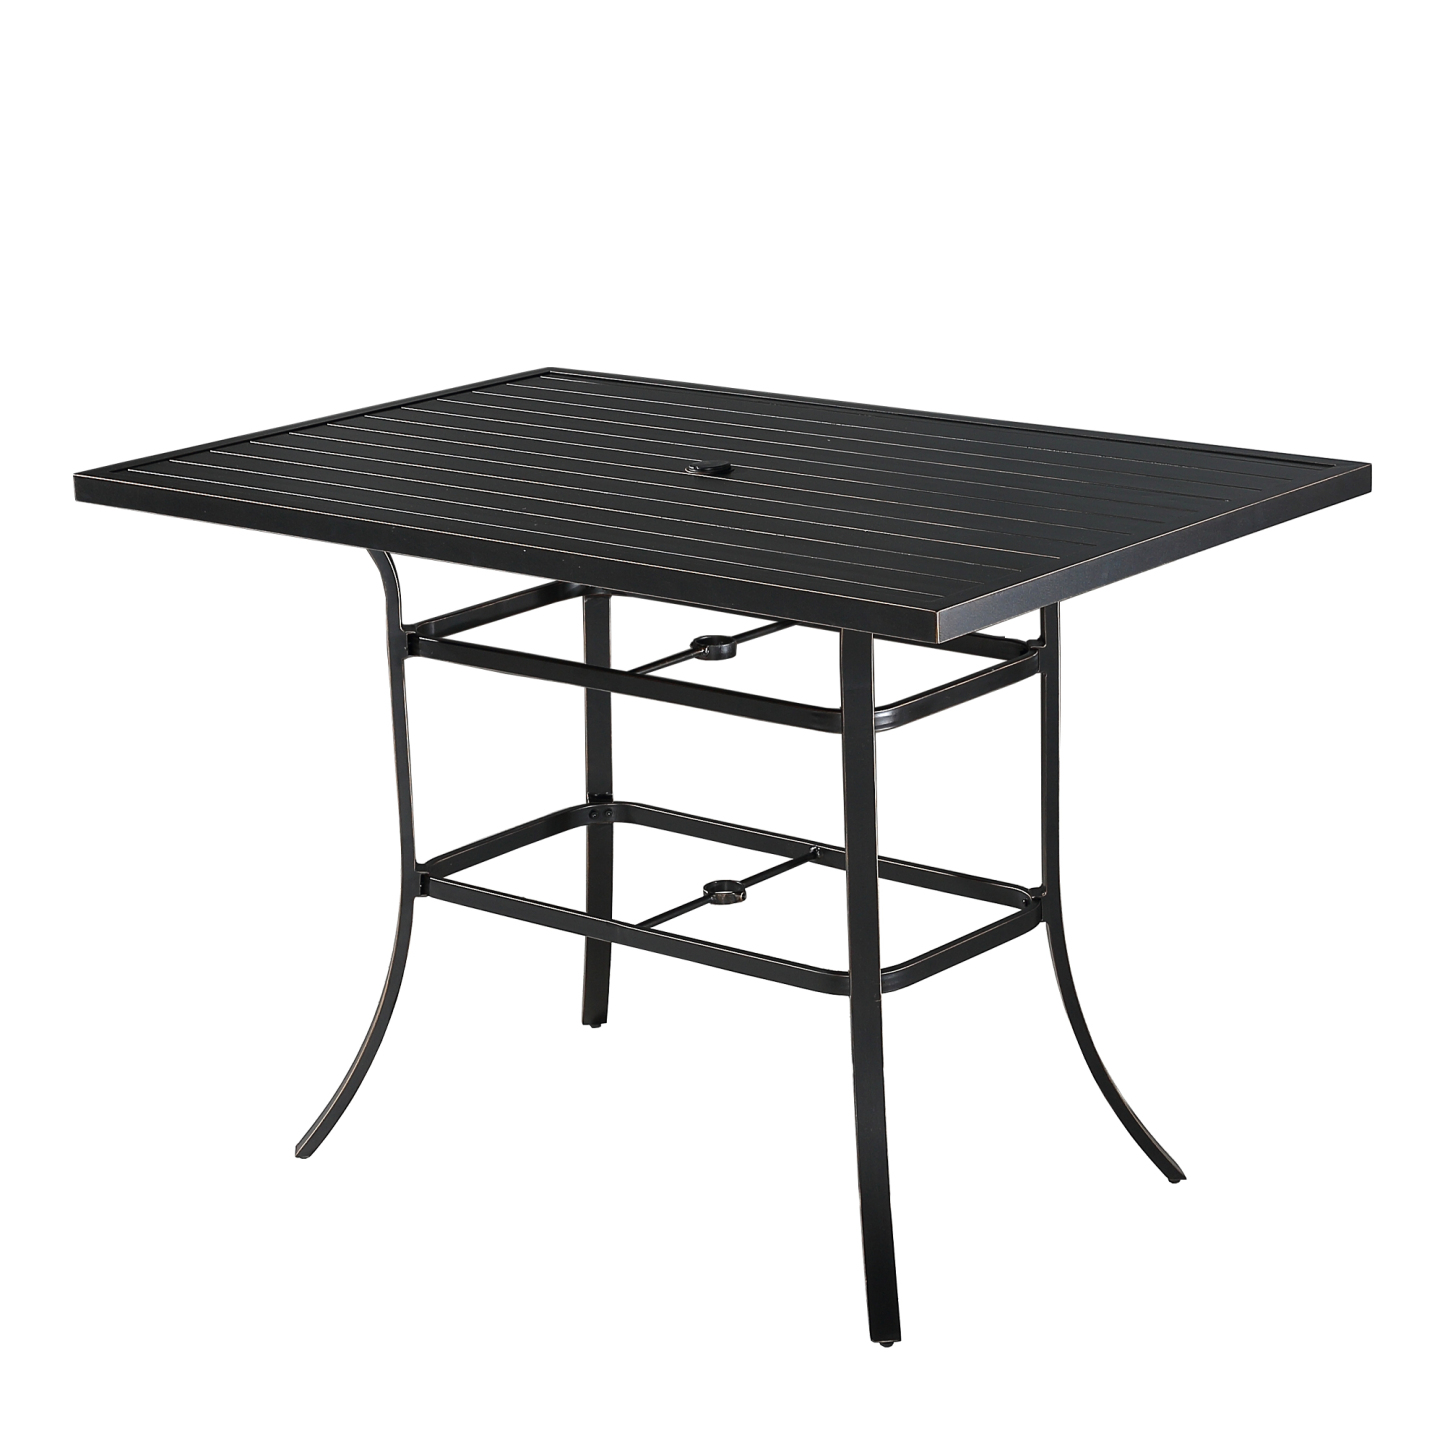 Mondawe Patio Rectangle Aluminum Frame Bar Height Outdoor Dining Table Accent Table with Umbrella Hole-Mondawe